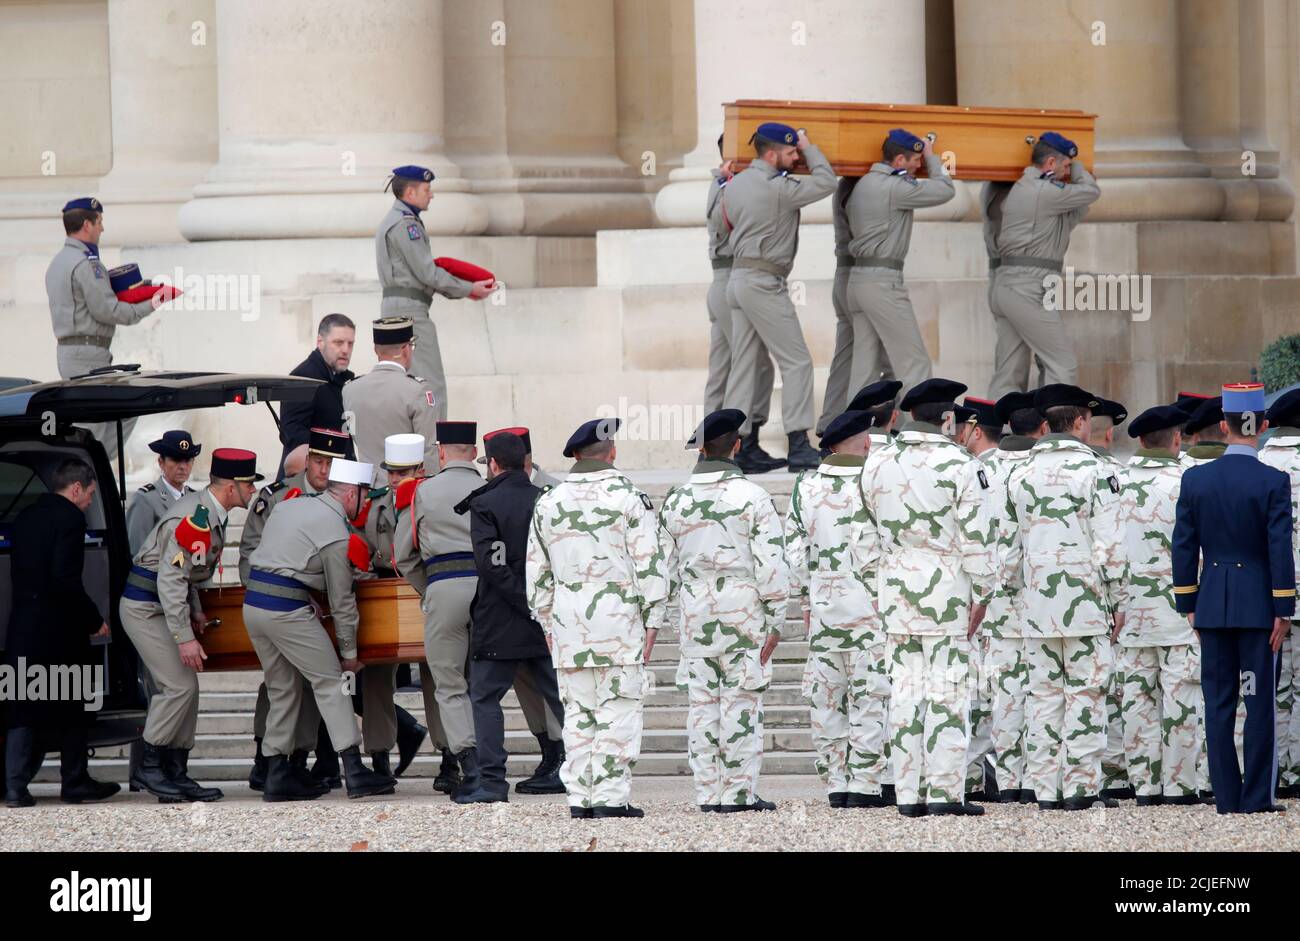 Soldiers carry the coffins of late thirteen French soldiers killed in Mali, before a ceremony at the Hotel National des Invalides in Paris, France, December 2, 2019. French soldiers Julien Carrette, Benjamin Gireud, Romain Salles de Saint-Paul, Clement Frison-Roche, Nicolas Megard, Romain Chomel de Jarnieu, Pierre Bockel, Alex Morisse, Jeremy Leusie, Alexandre Protin, Antoine Serre, Valentin Duval, Andrei Jouk died in Mali when their helicopters collided in the dark last week as they hunted for Islamist militants.   REUTERS/Charles Platiau Stock Photo